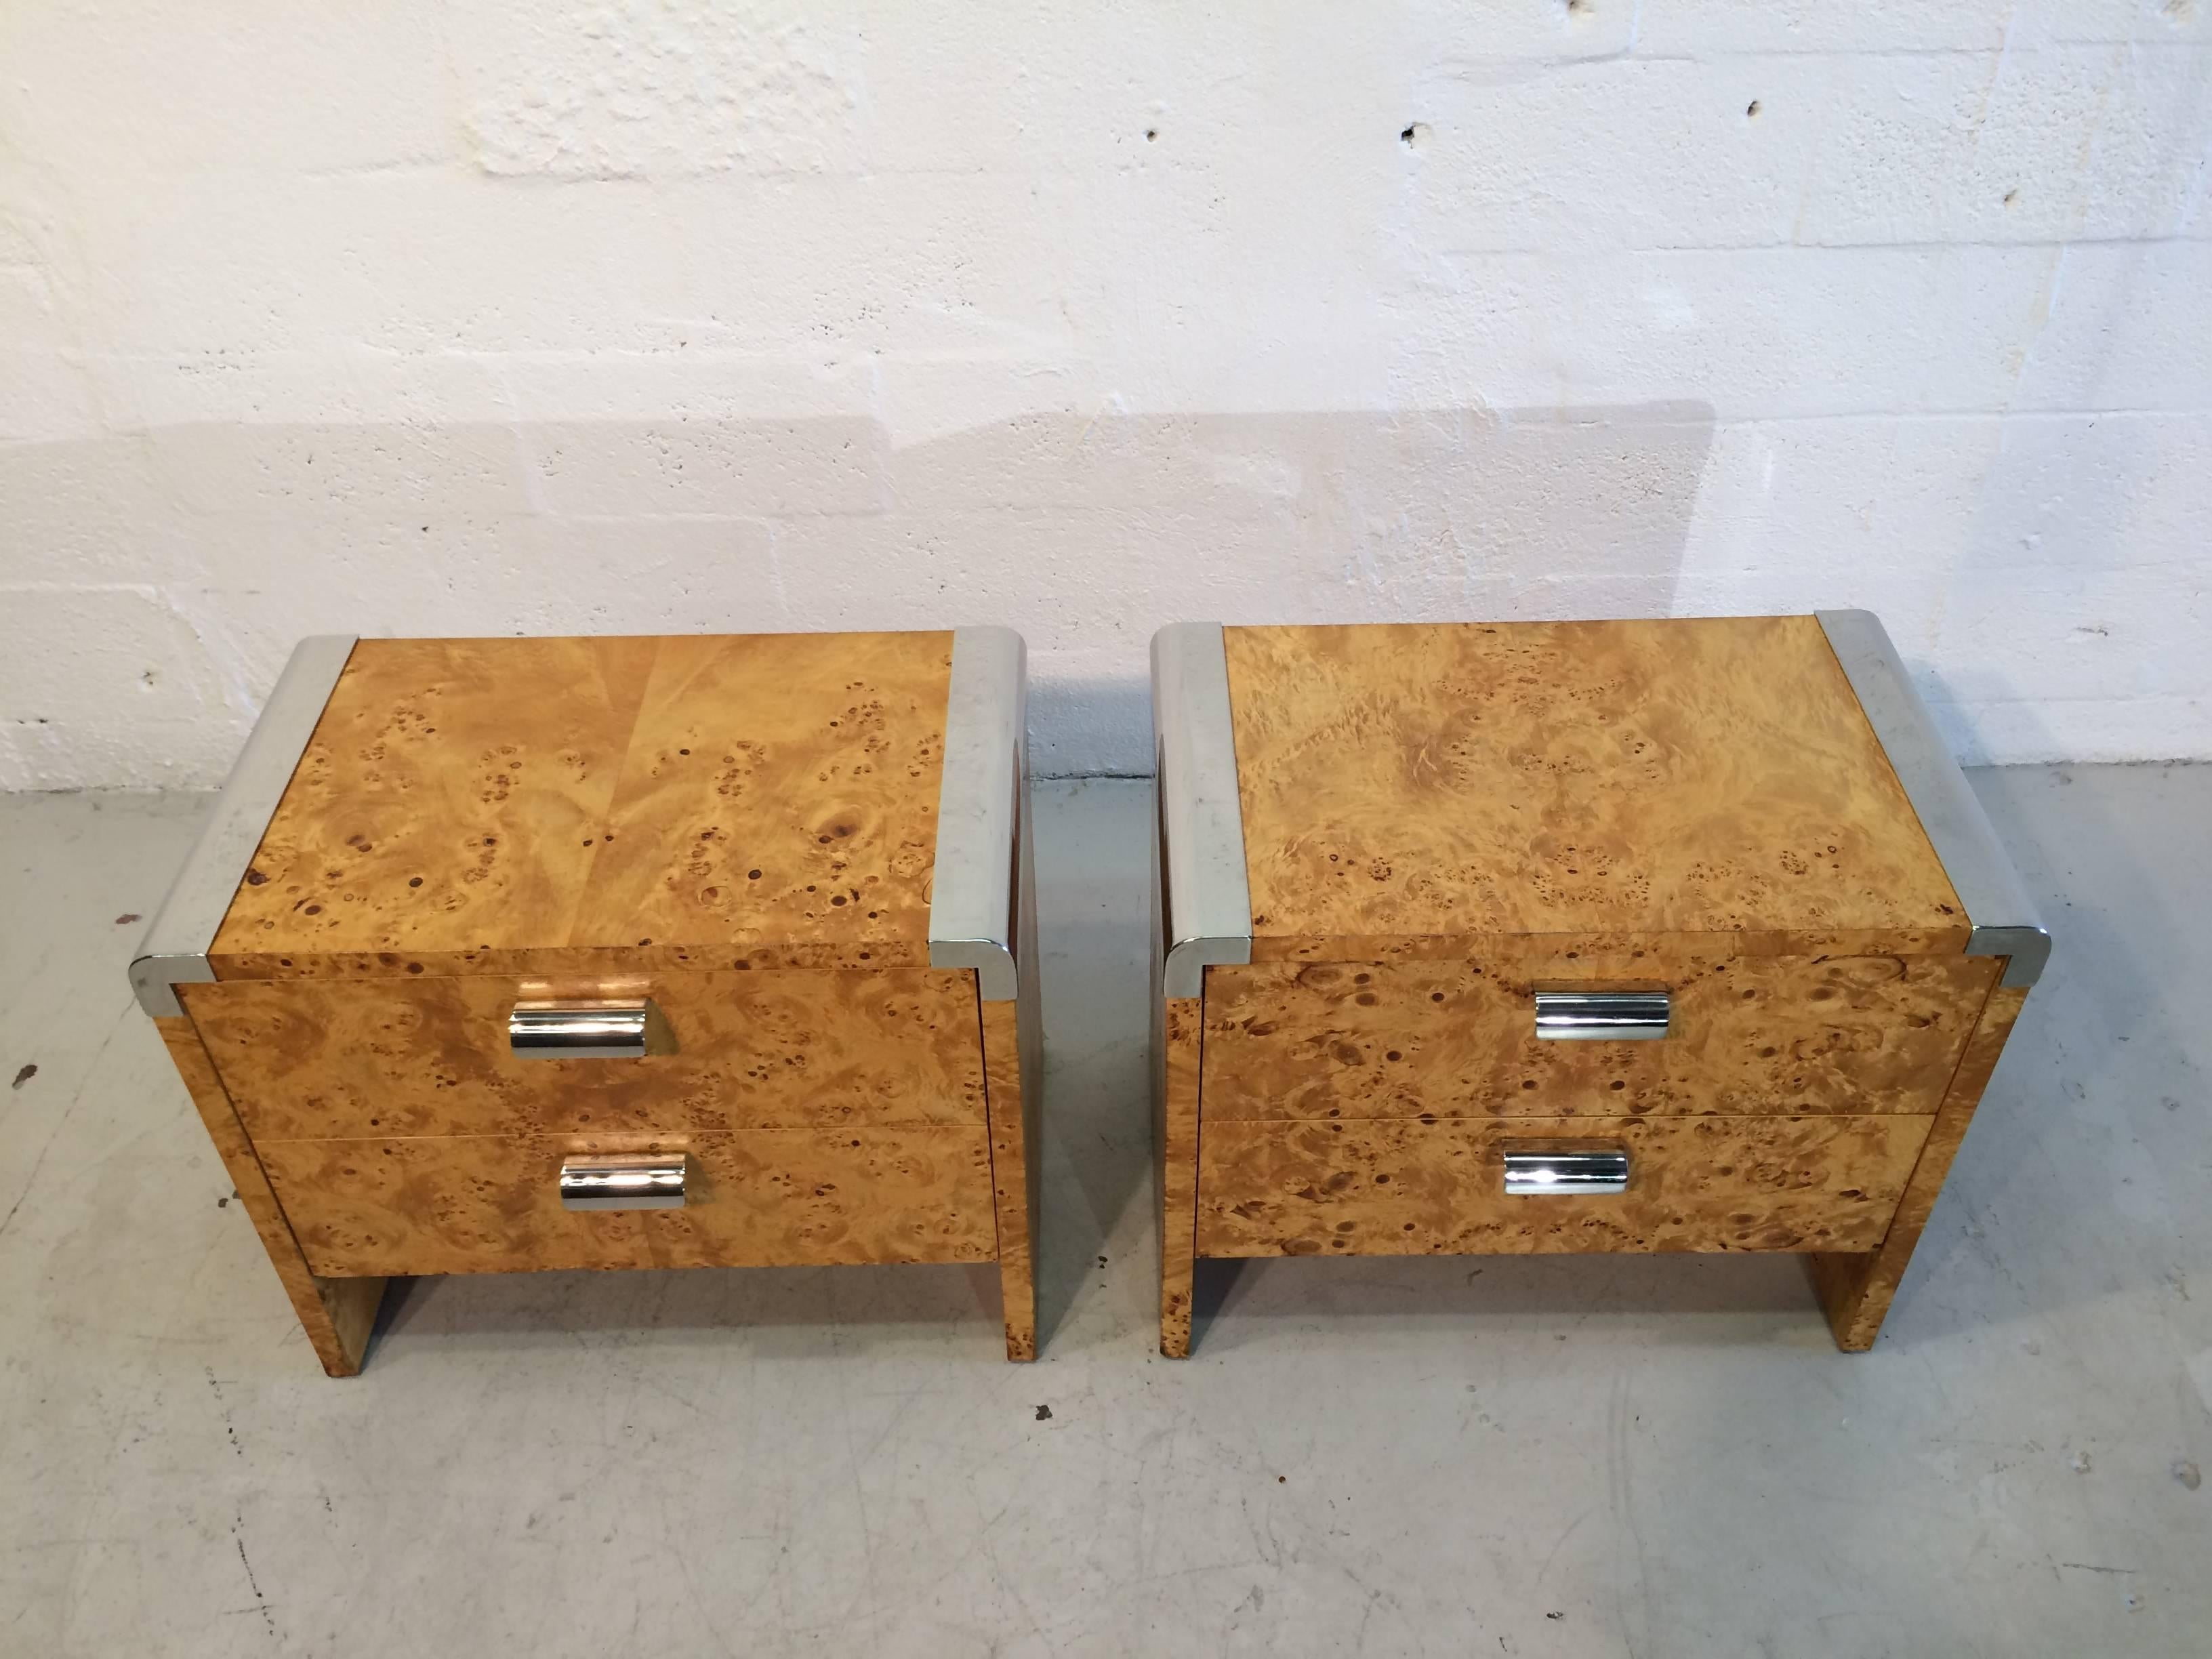 Two great nightstands, each comes with two drawers and stainless steel pulls and corners. We also have a matching 78